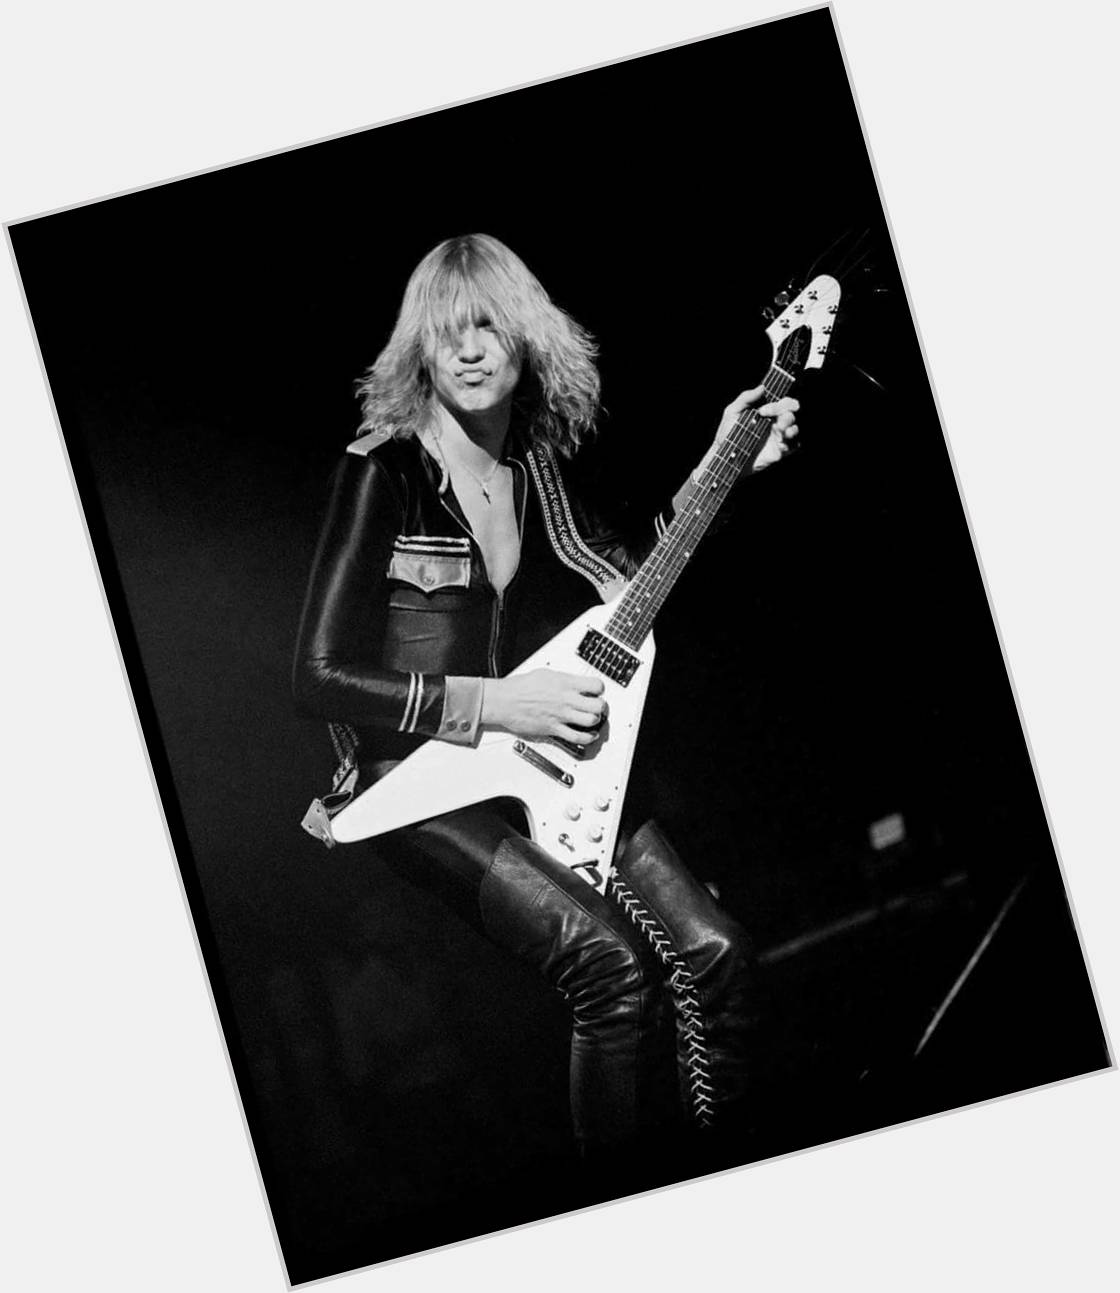 Happy birthday to the incredible guitar genius that is Michael Schenker, born this day in 1955. 